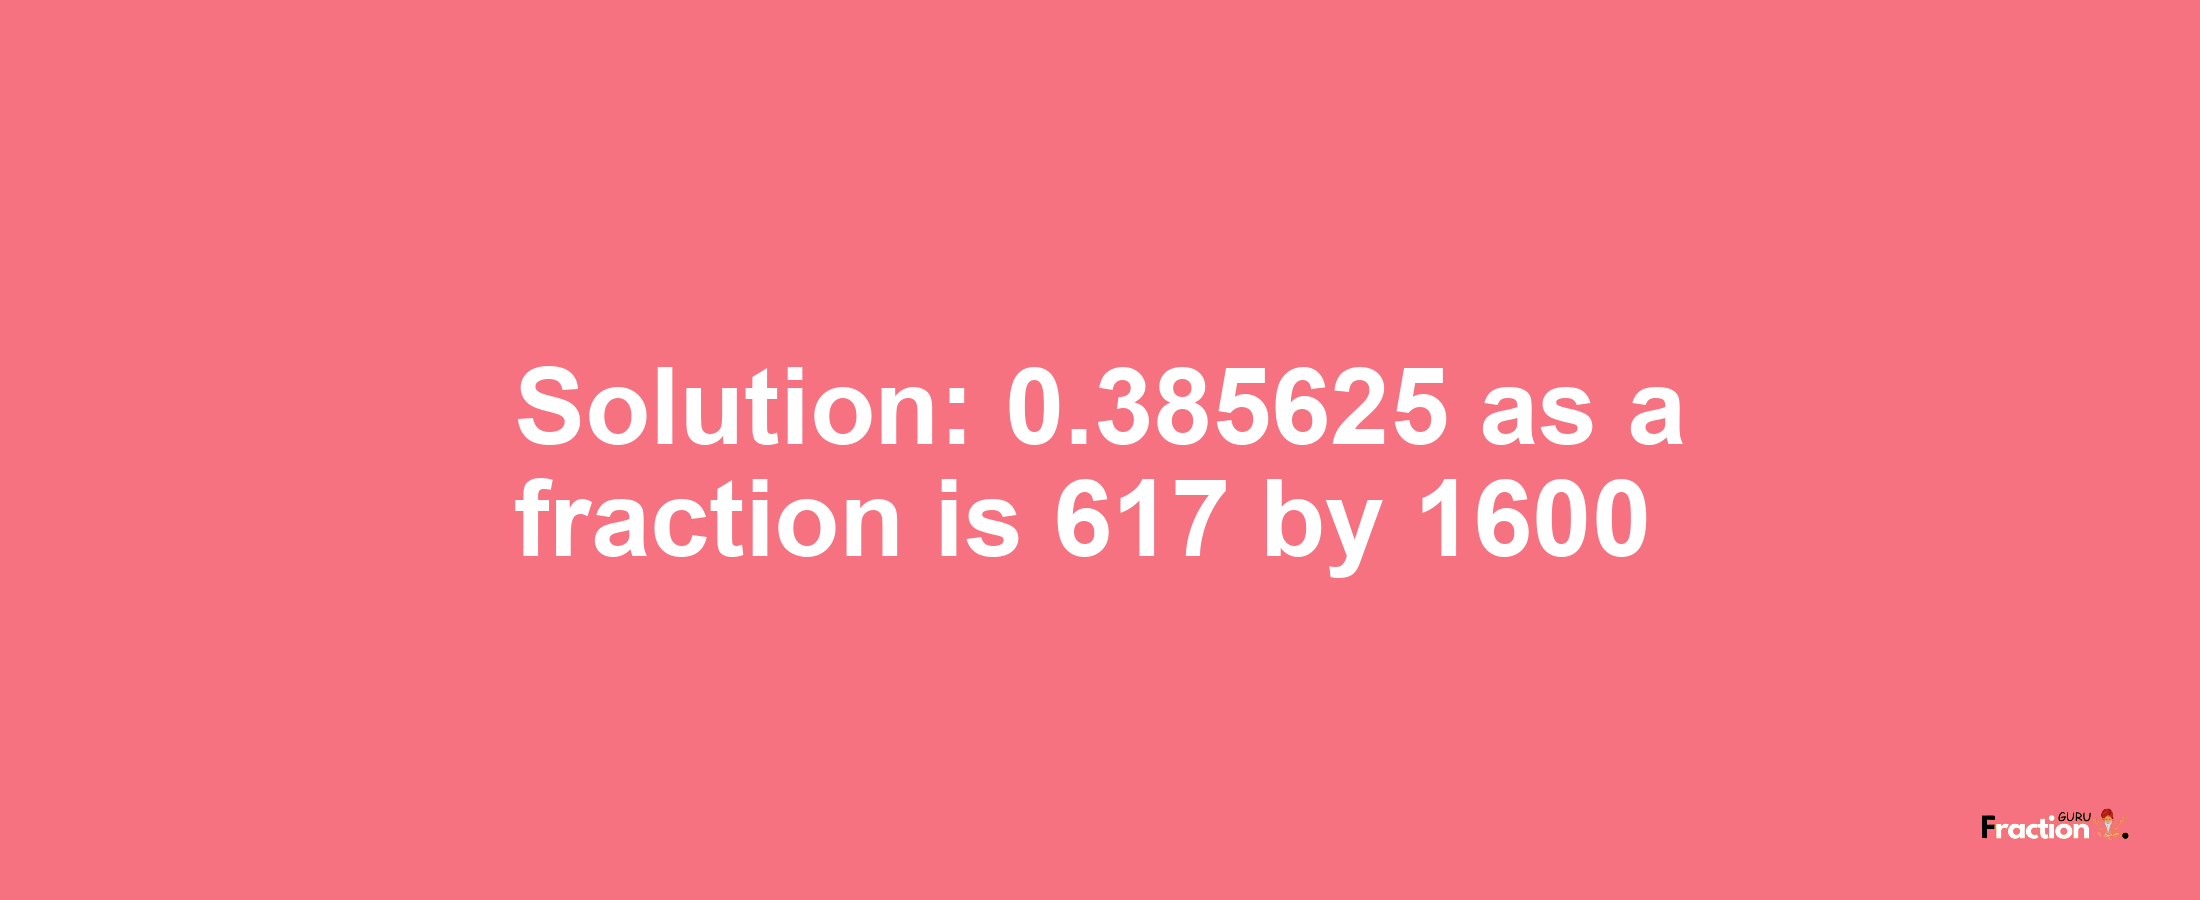 Solution:0.385625 as a fraction is 617/1600